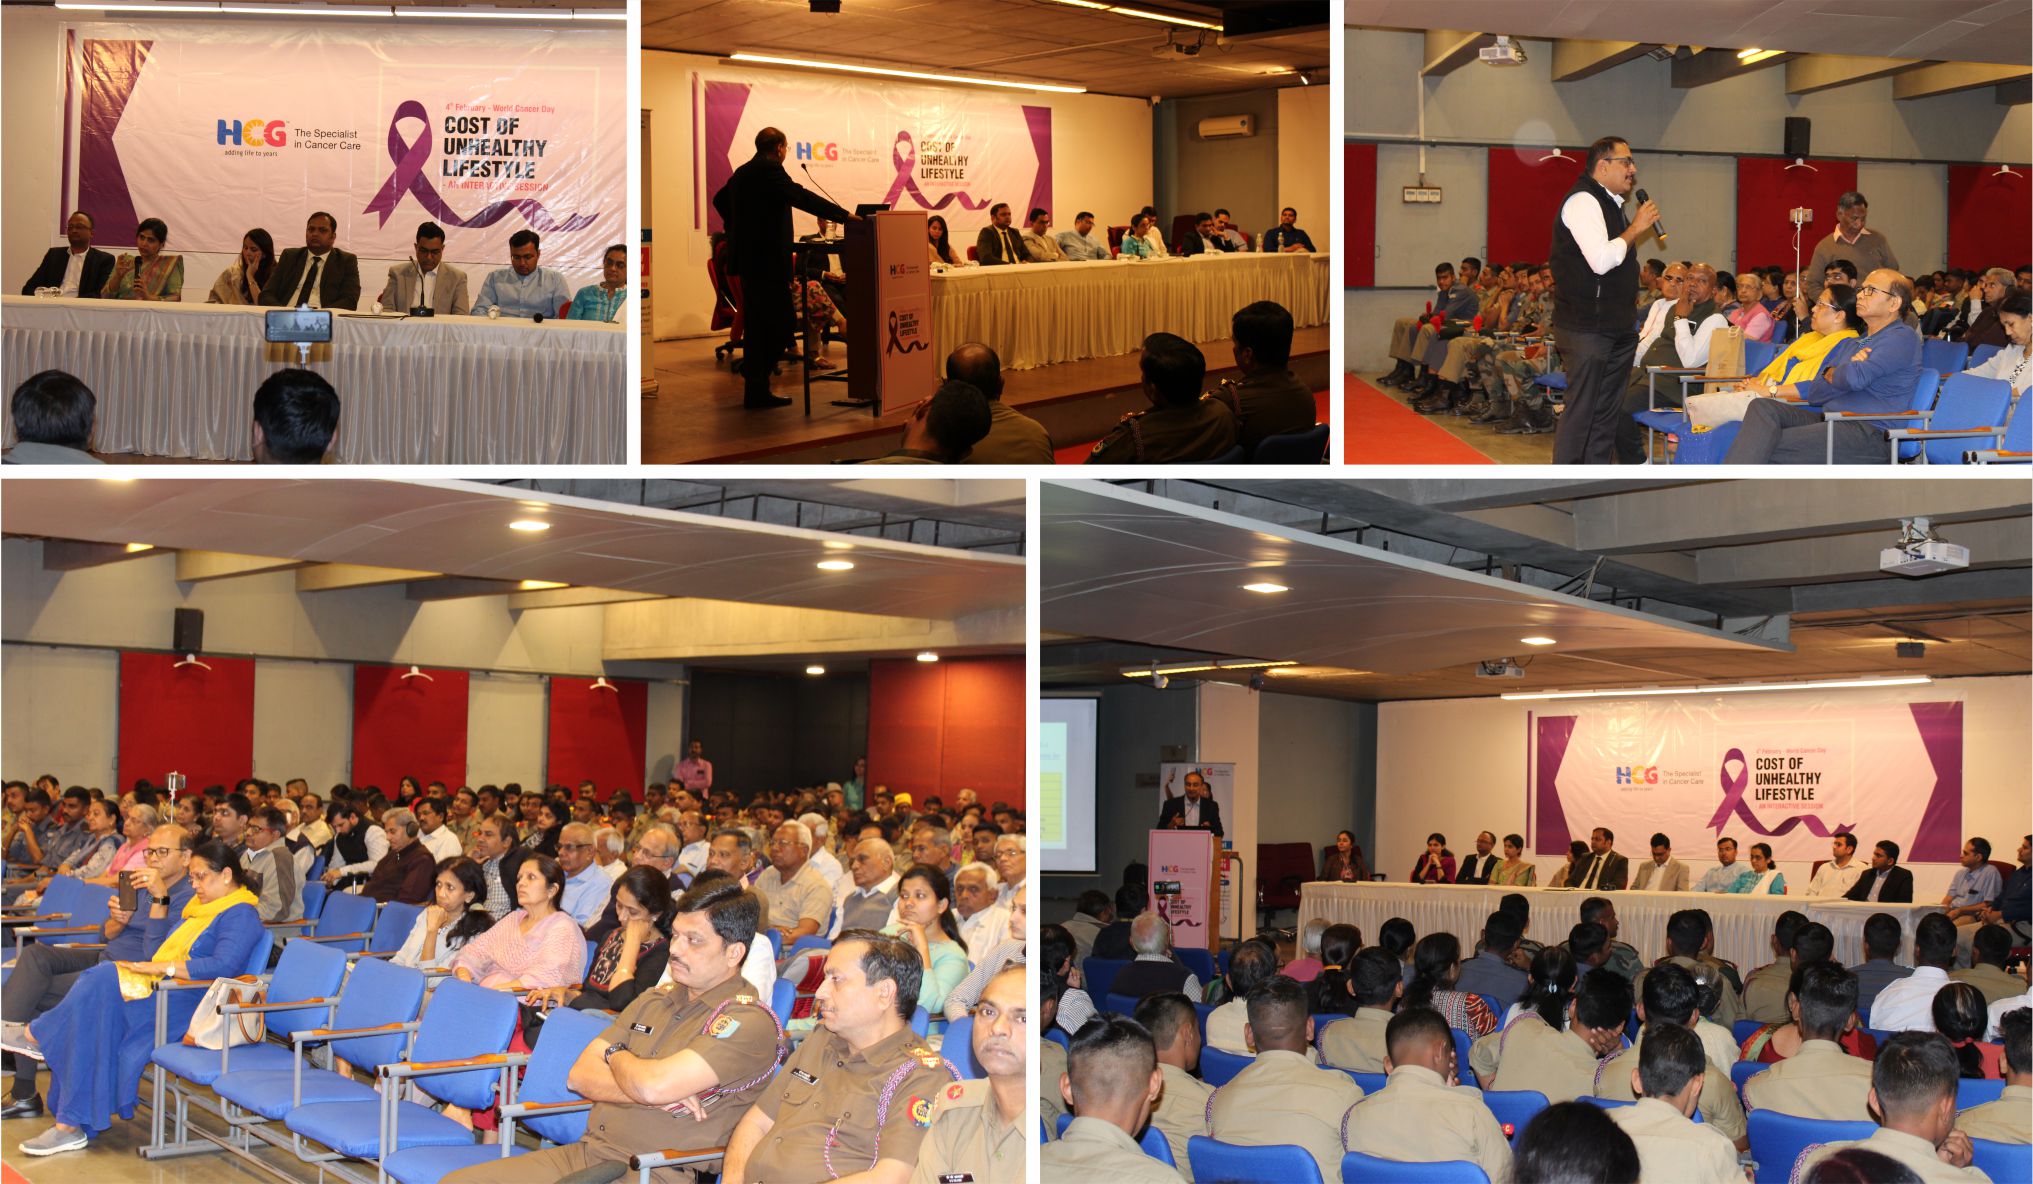 HCG Cancer Center organized a interactive session on World Cancer Day 2020